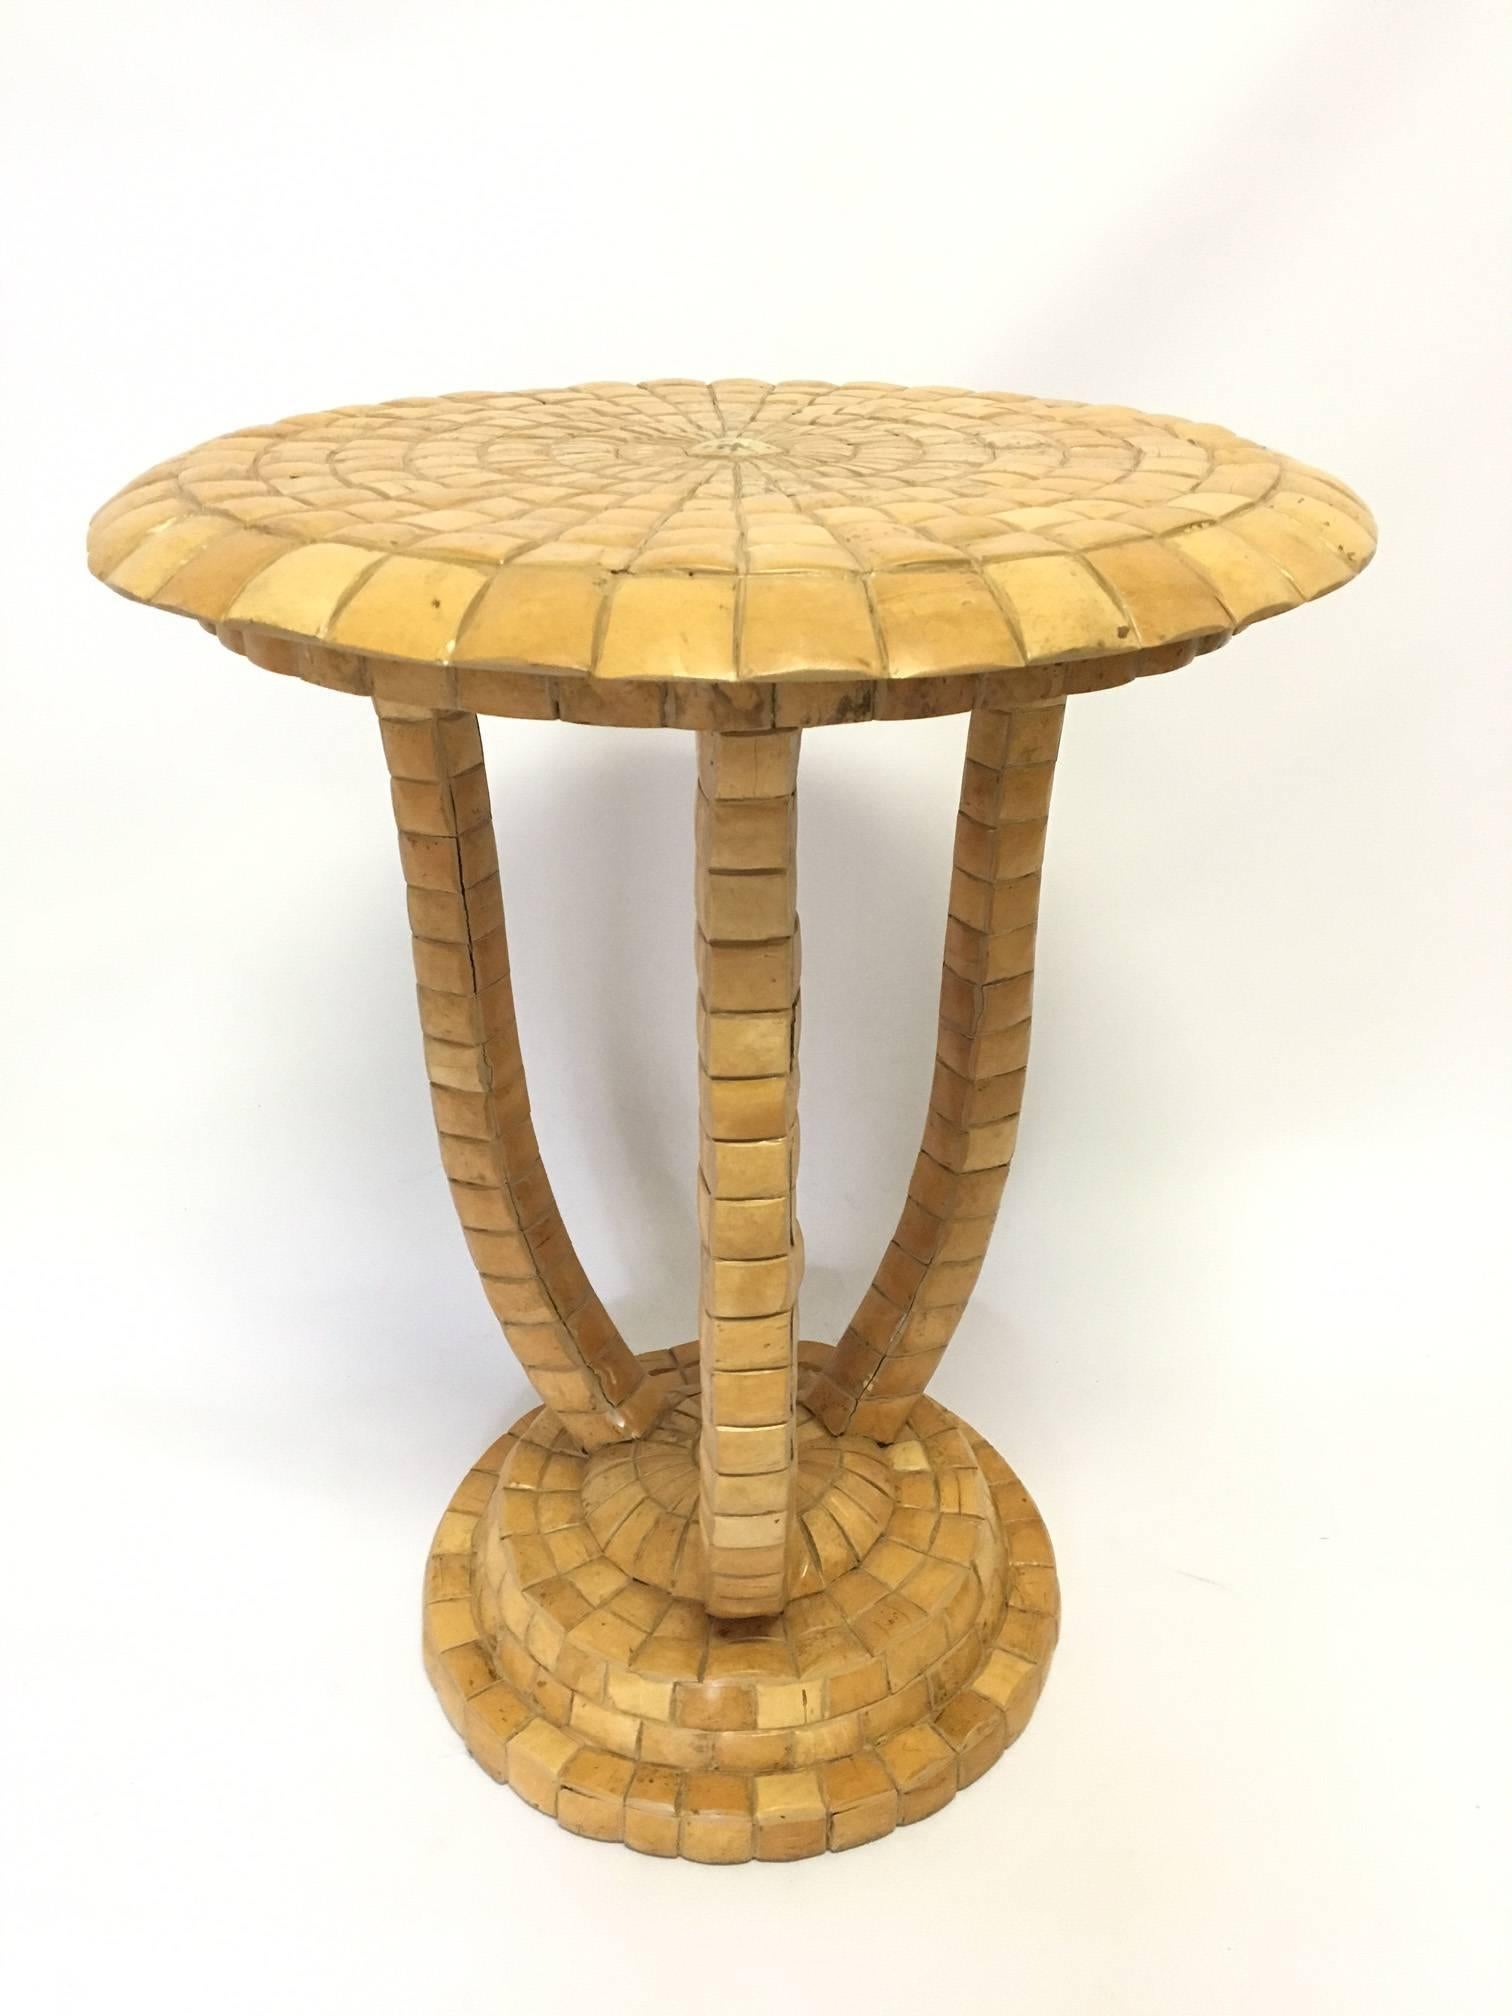 Tall Maitland Smith side table covered in a mosaic of small tiles that appear to be shell or bone. Very heavy and well constructed. Very good condition with some spacing appearing between tiles, yet all tiles are very firmly intact.
As always, all